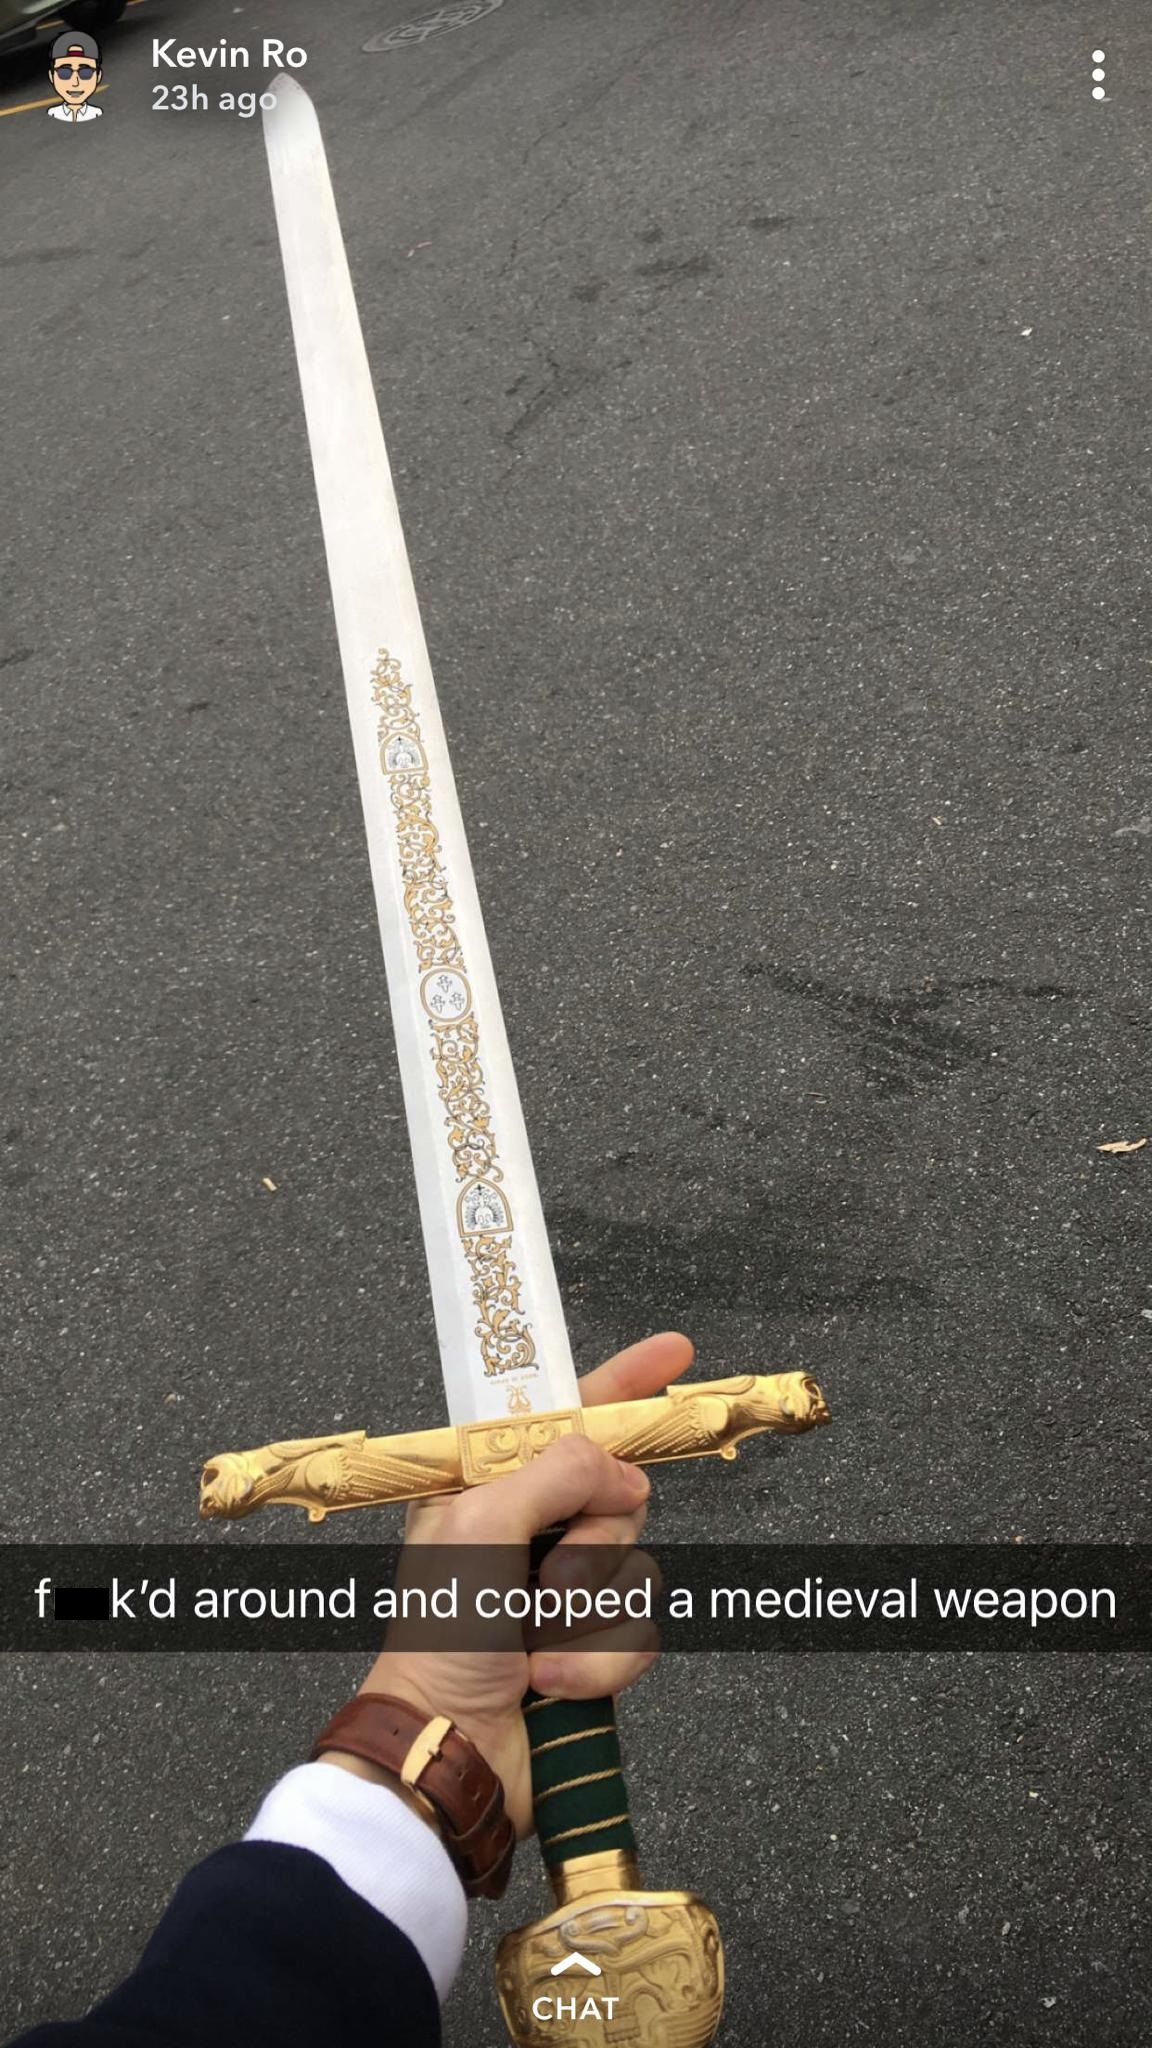 sword - Kevin Ro 23h ago f k'd around and copped a medieval weapon